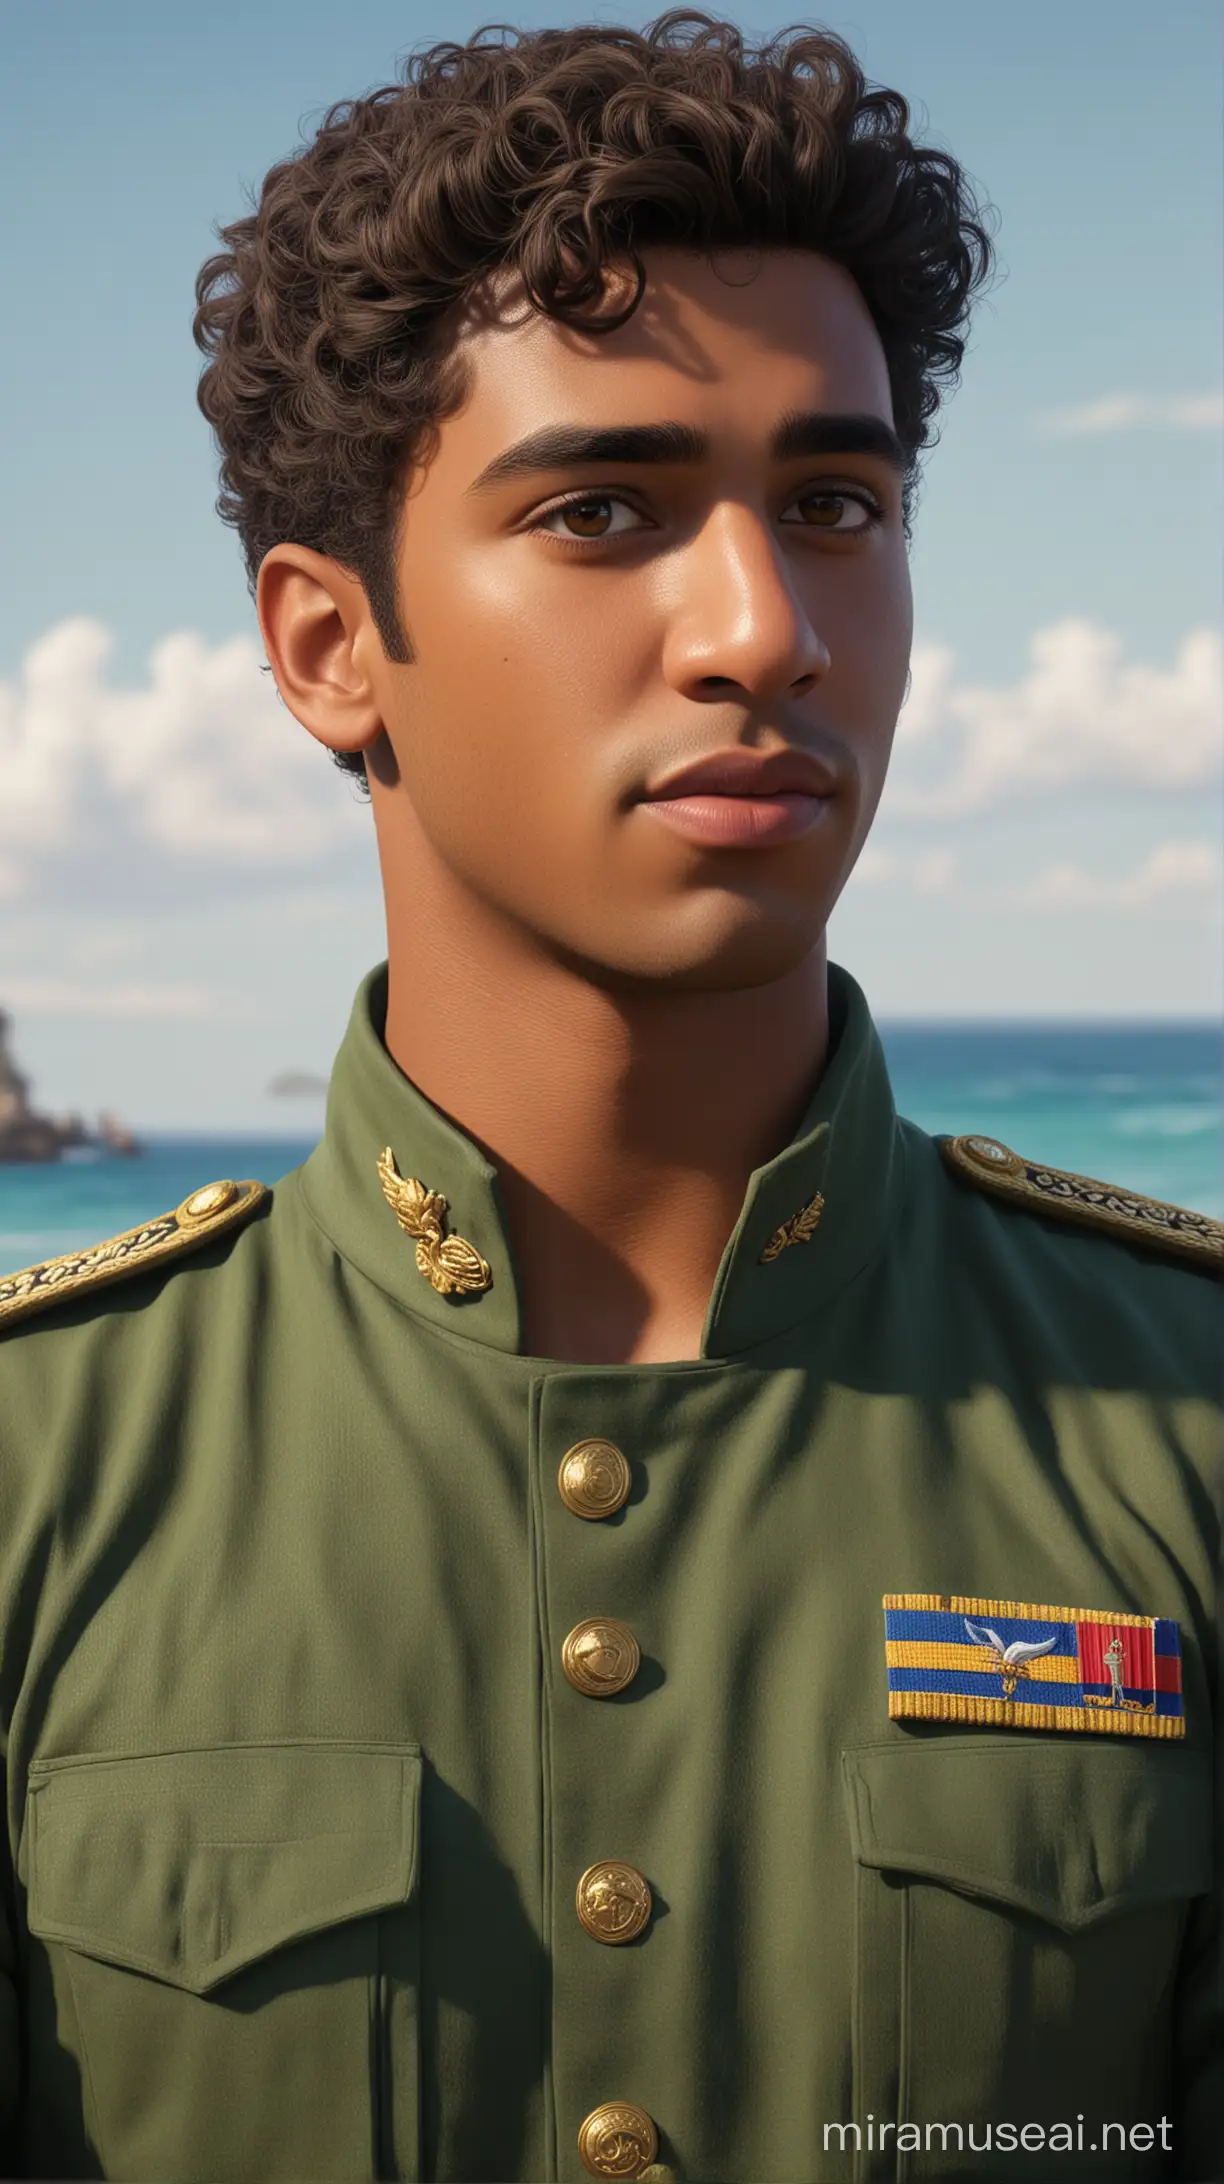 African American Disney Prince Naveen in Camouflage Military Uniform Amidst Natural Sea Background